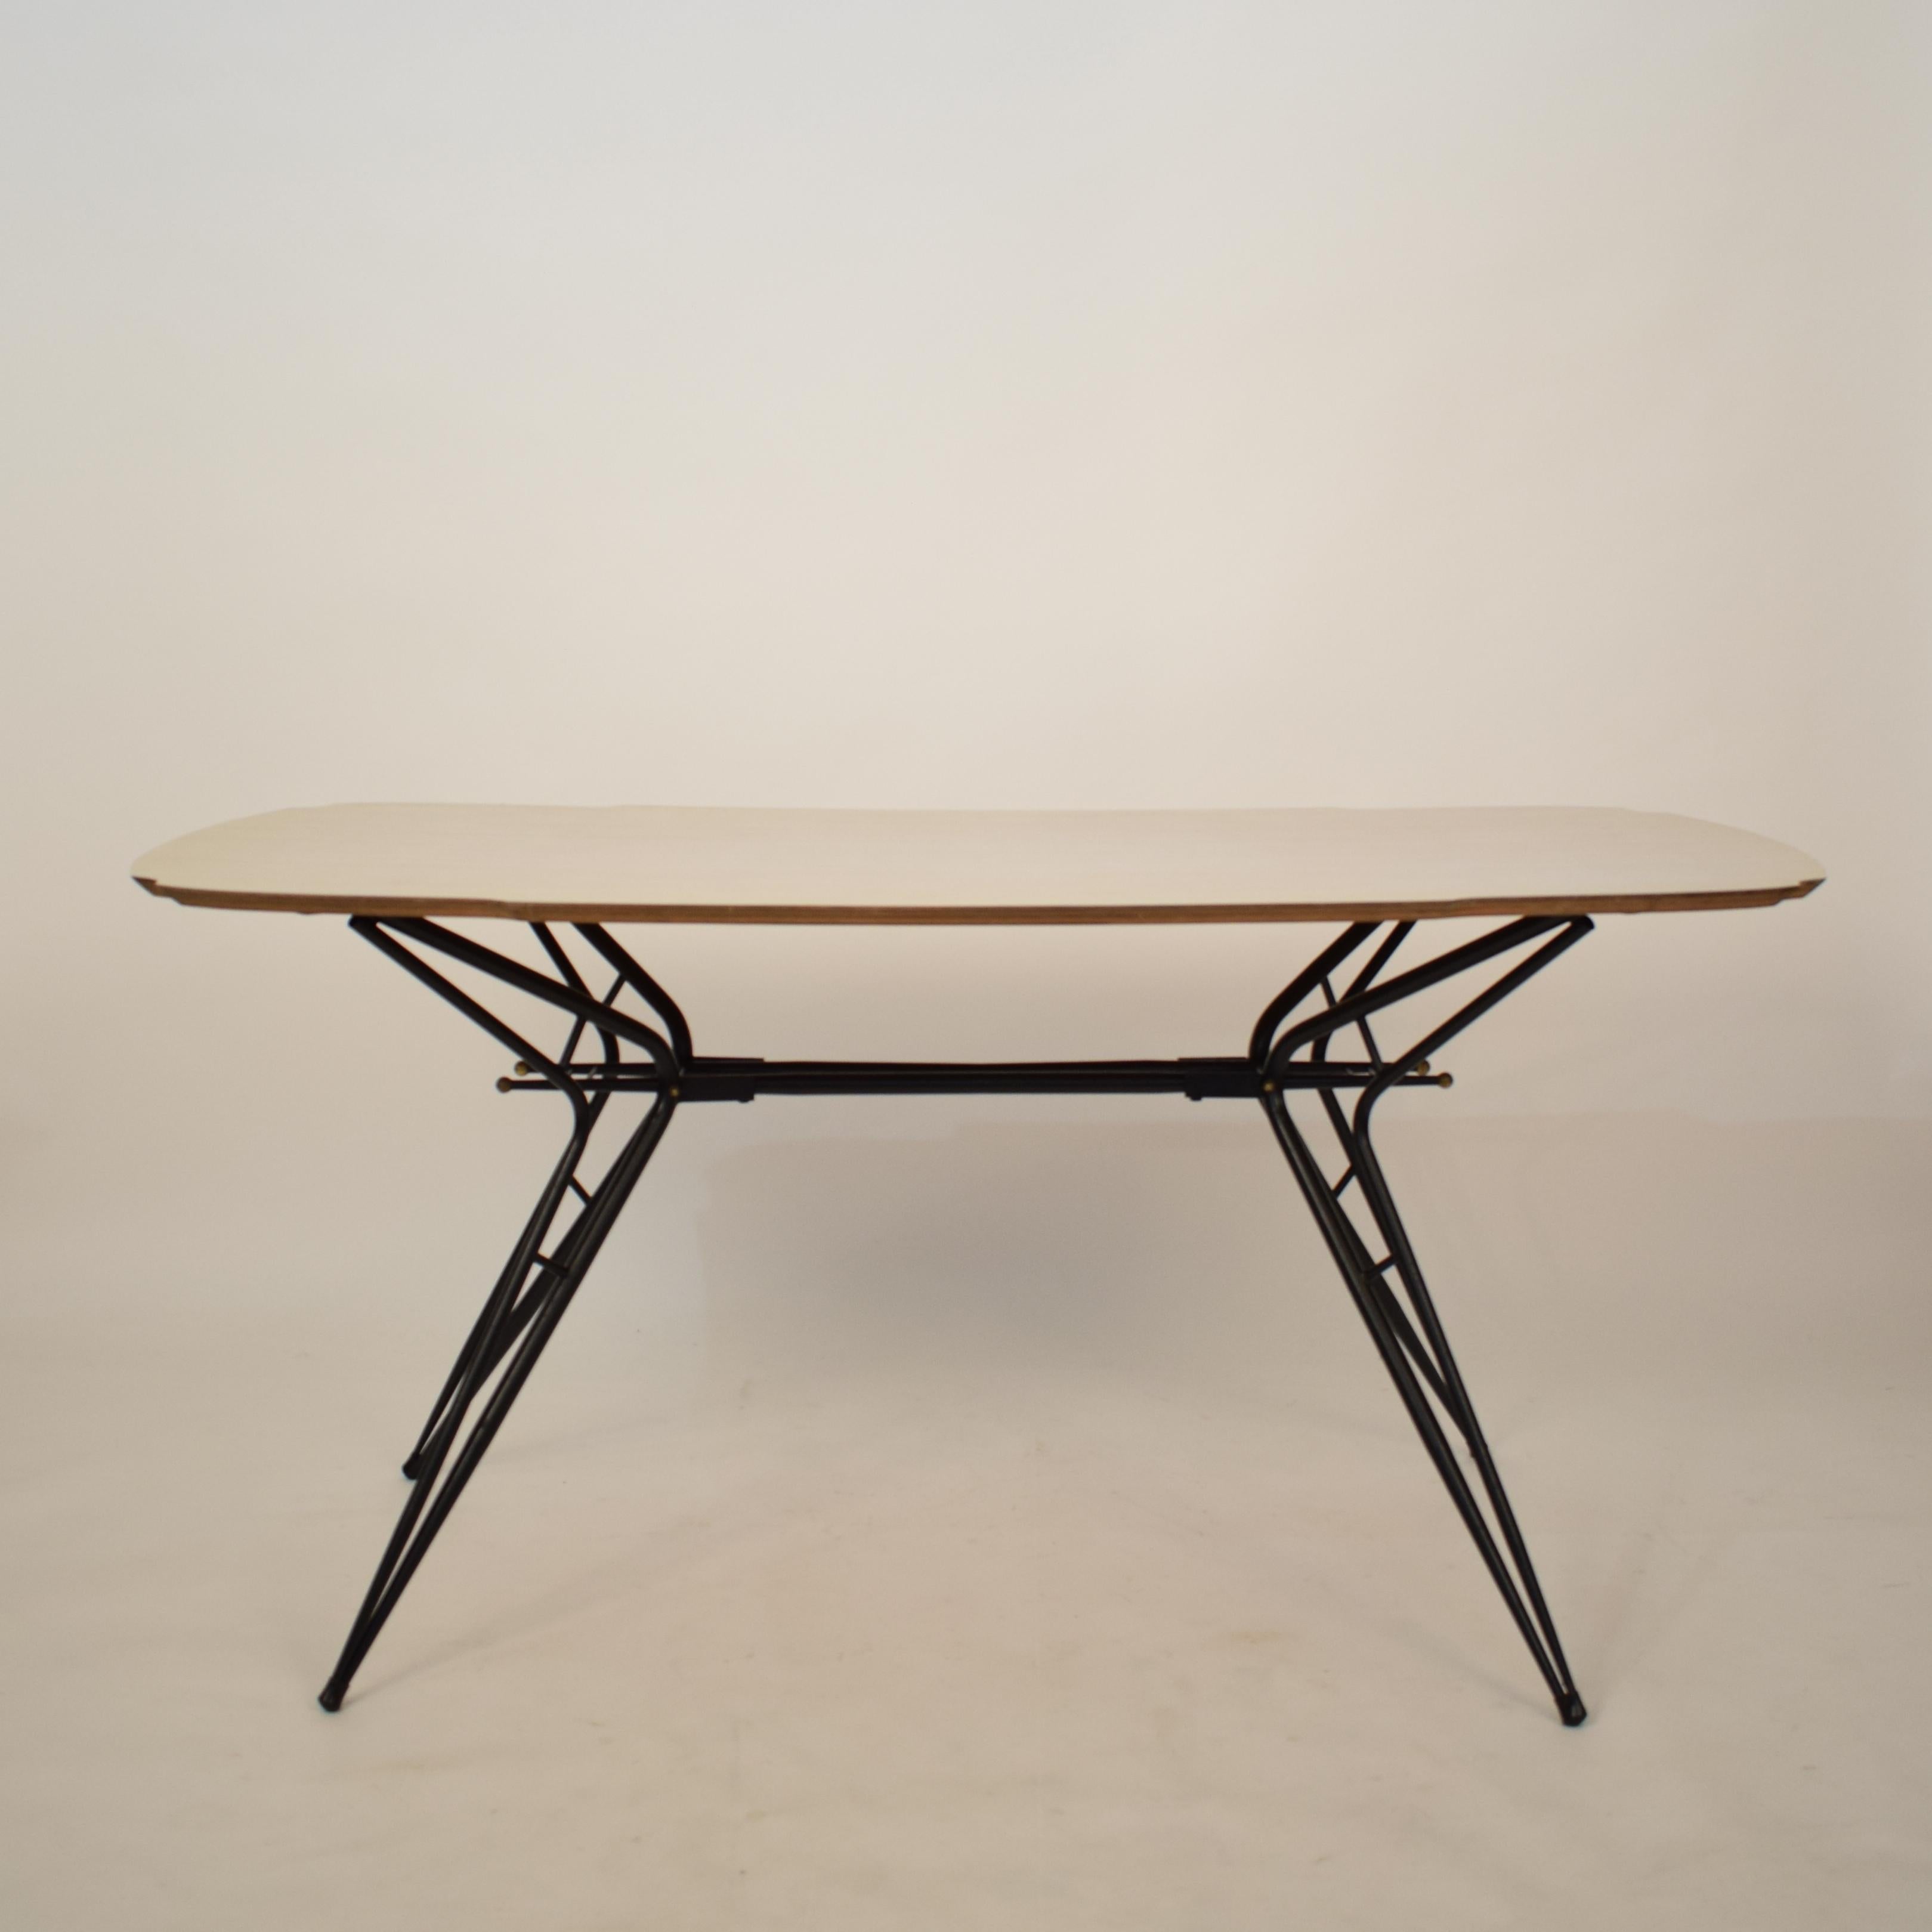 Mid-Century Modern Midcentury Italian Black and White Dining Table Attributed to Ico Parisi, 1958 For Sale